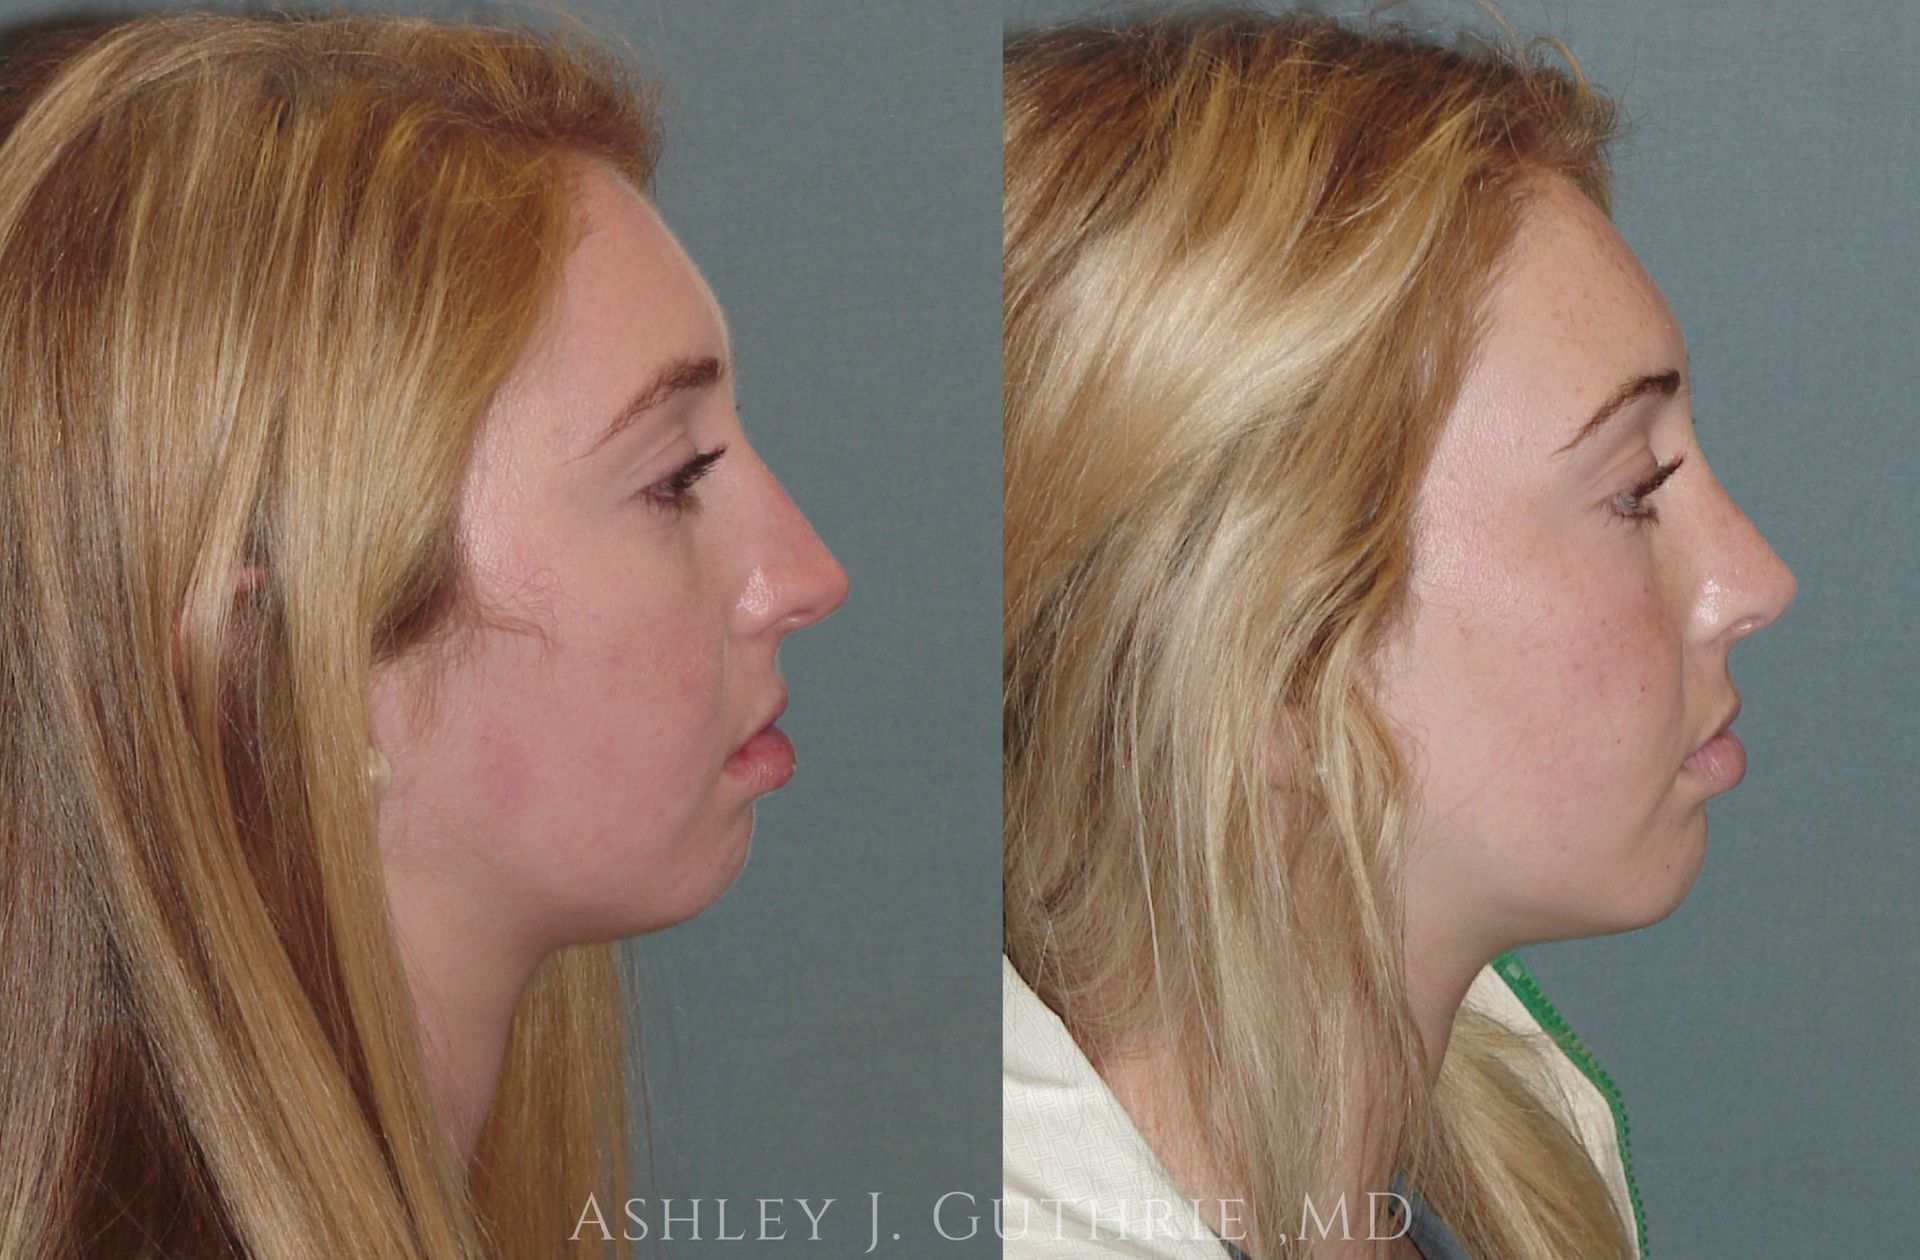 woman before and after chin implant procedure